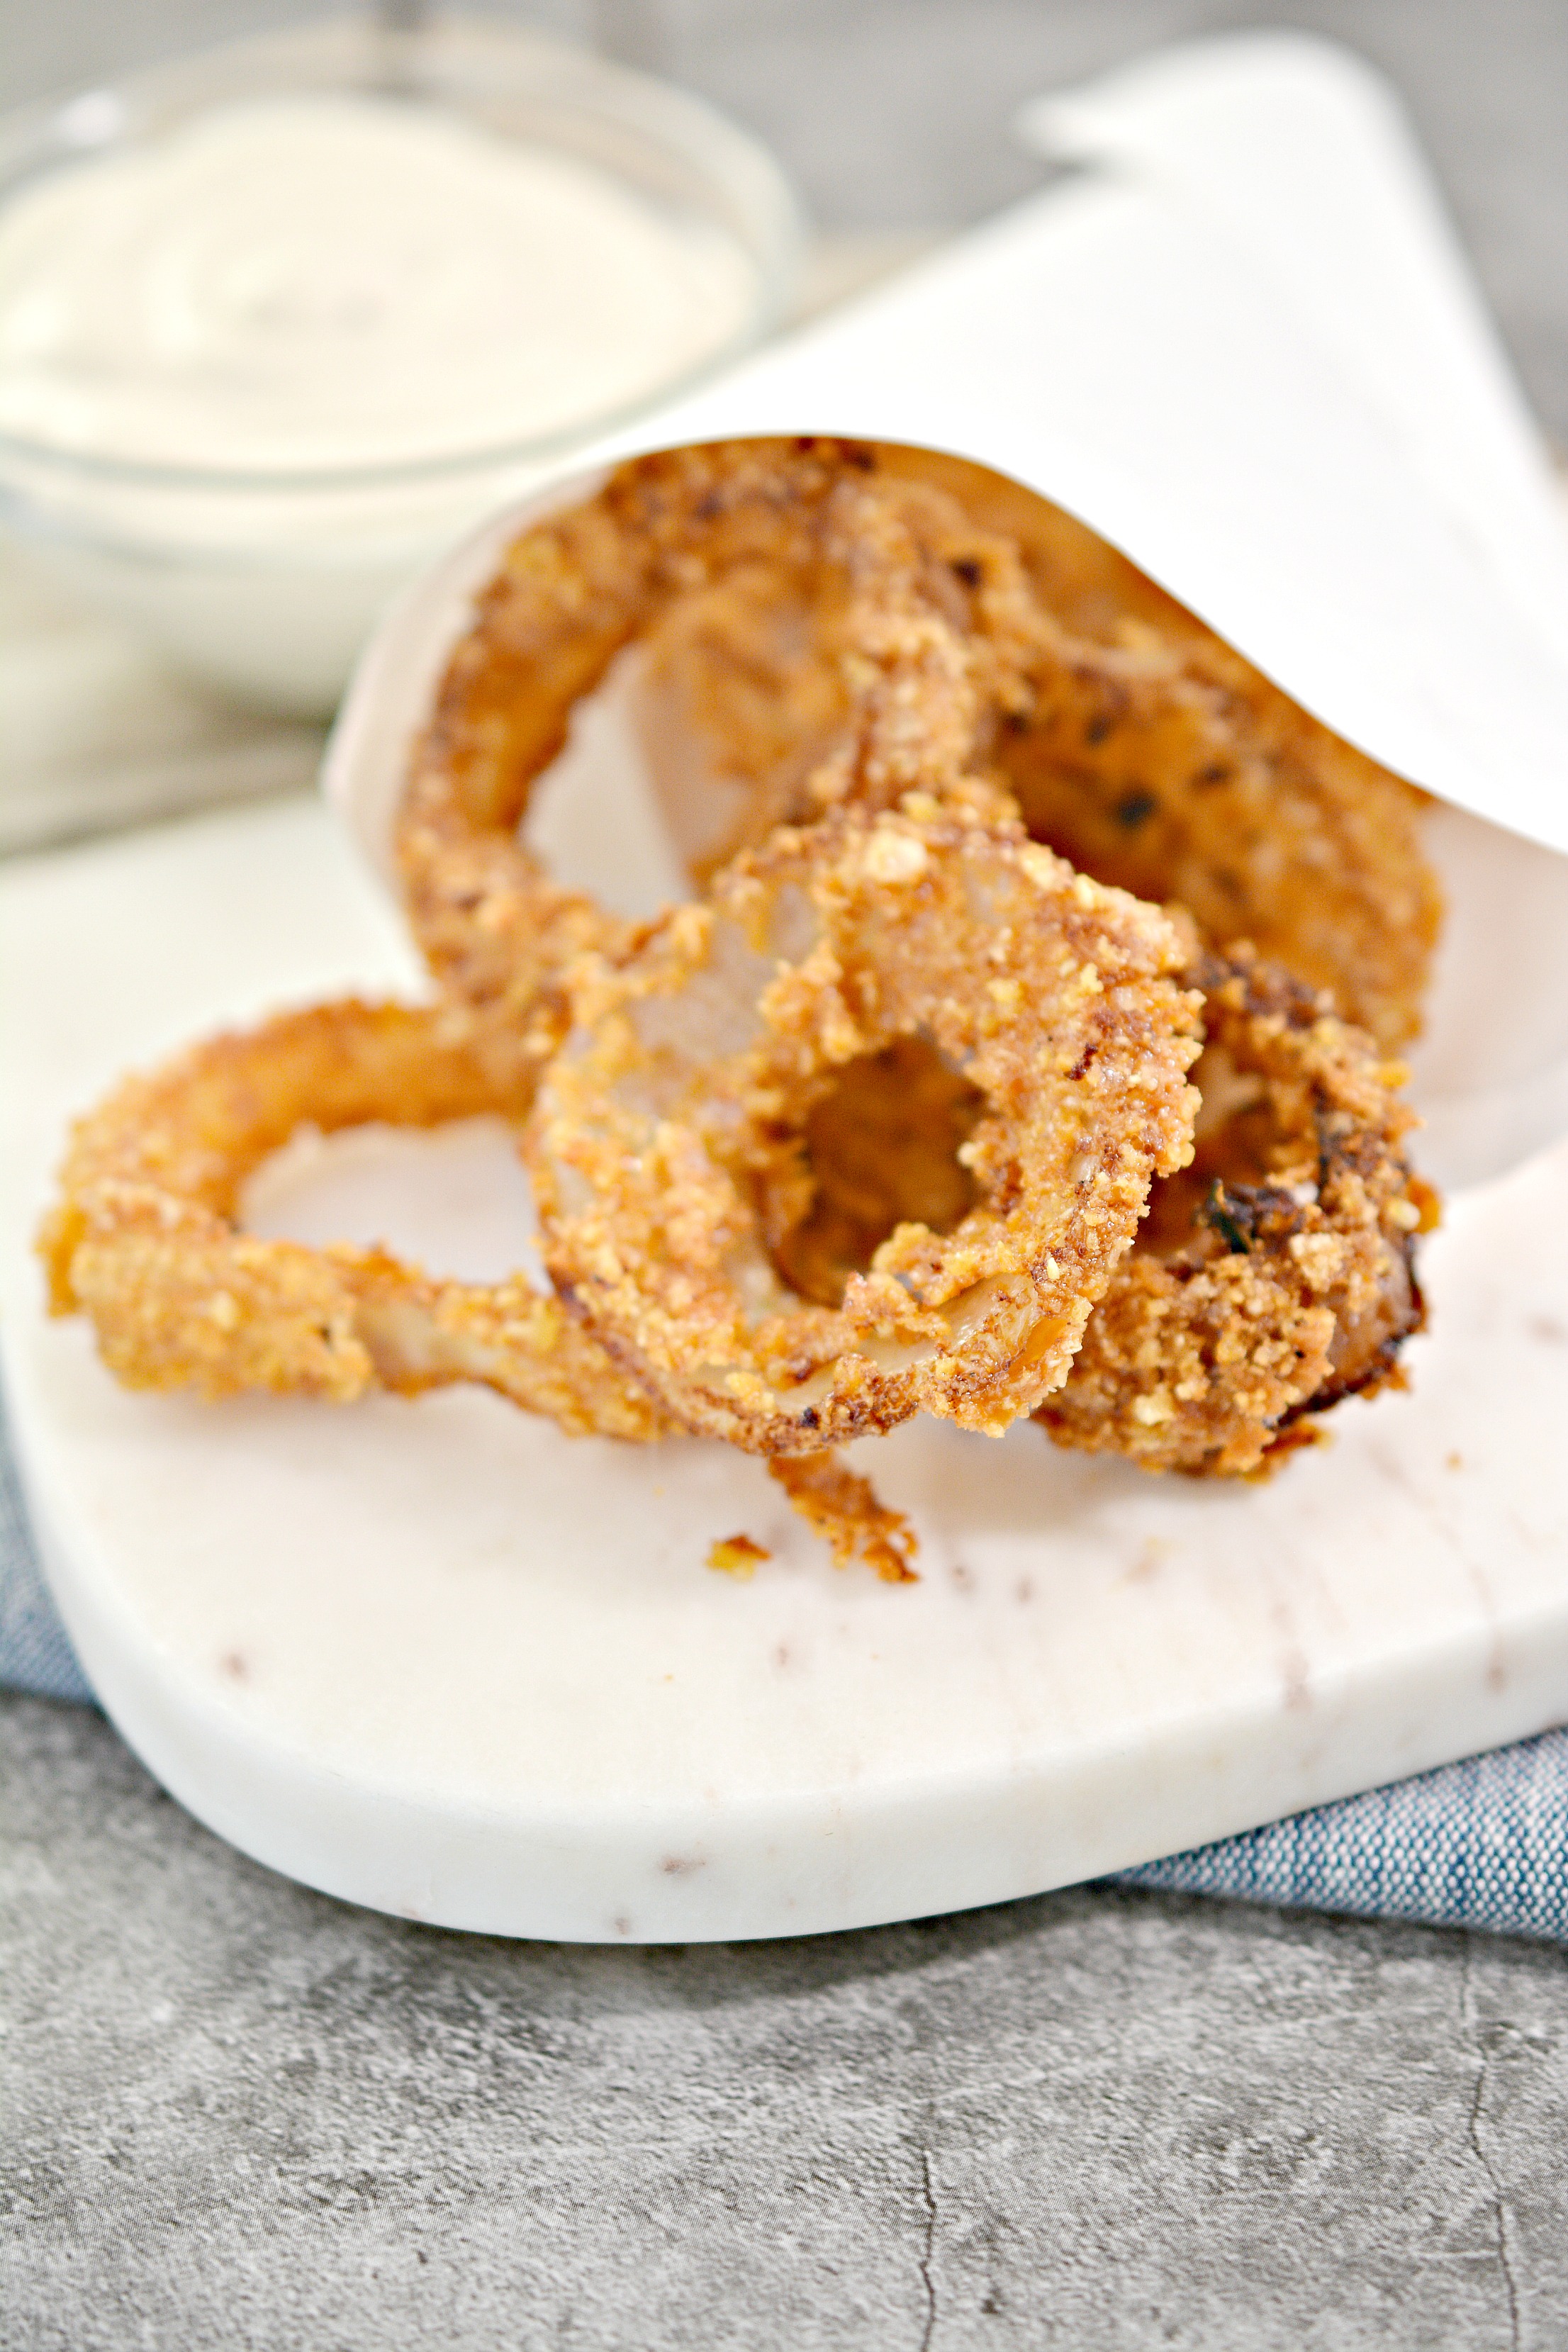 Following Keto? Want a delicious snack or side dish that has the perfect crunch? Make these keto onion rings. They taste just like the real things and are perfect when you want onion rings or a crunchy snack.